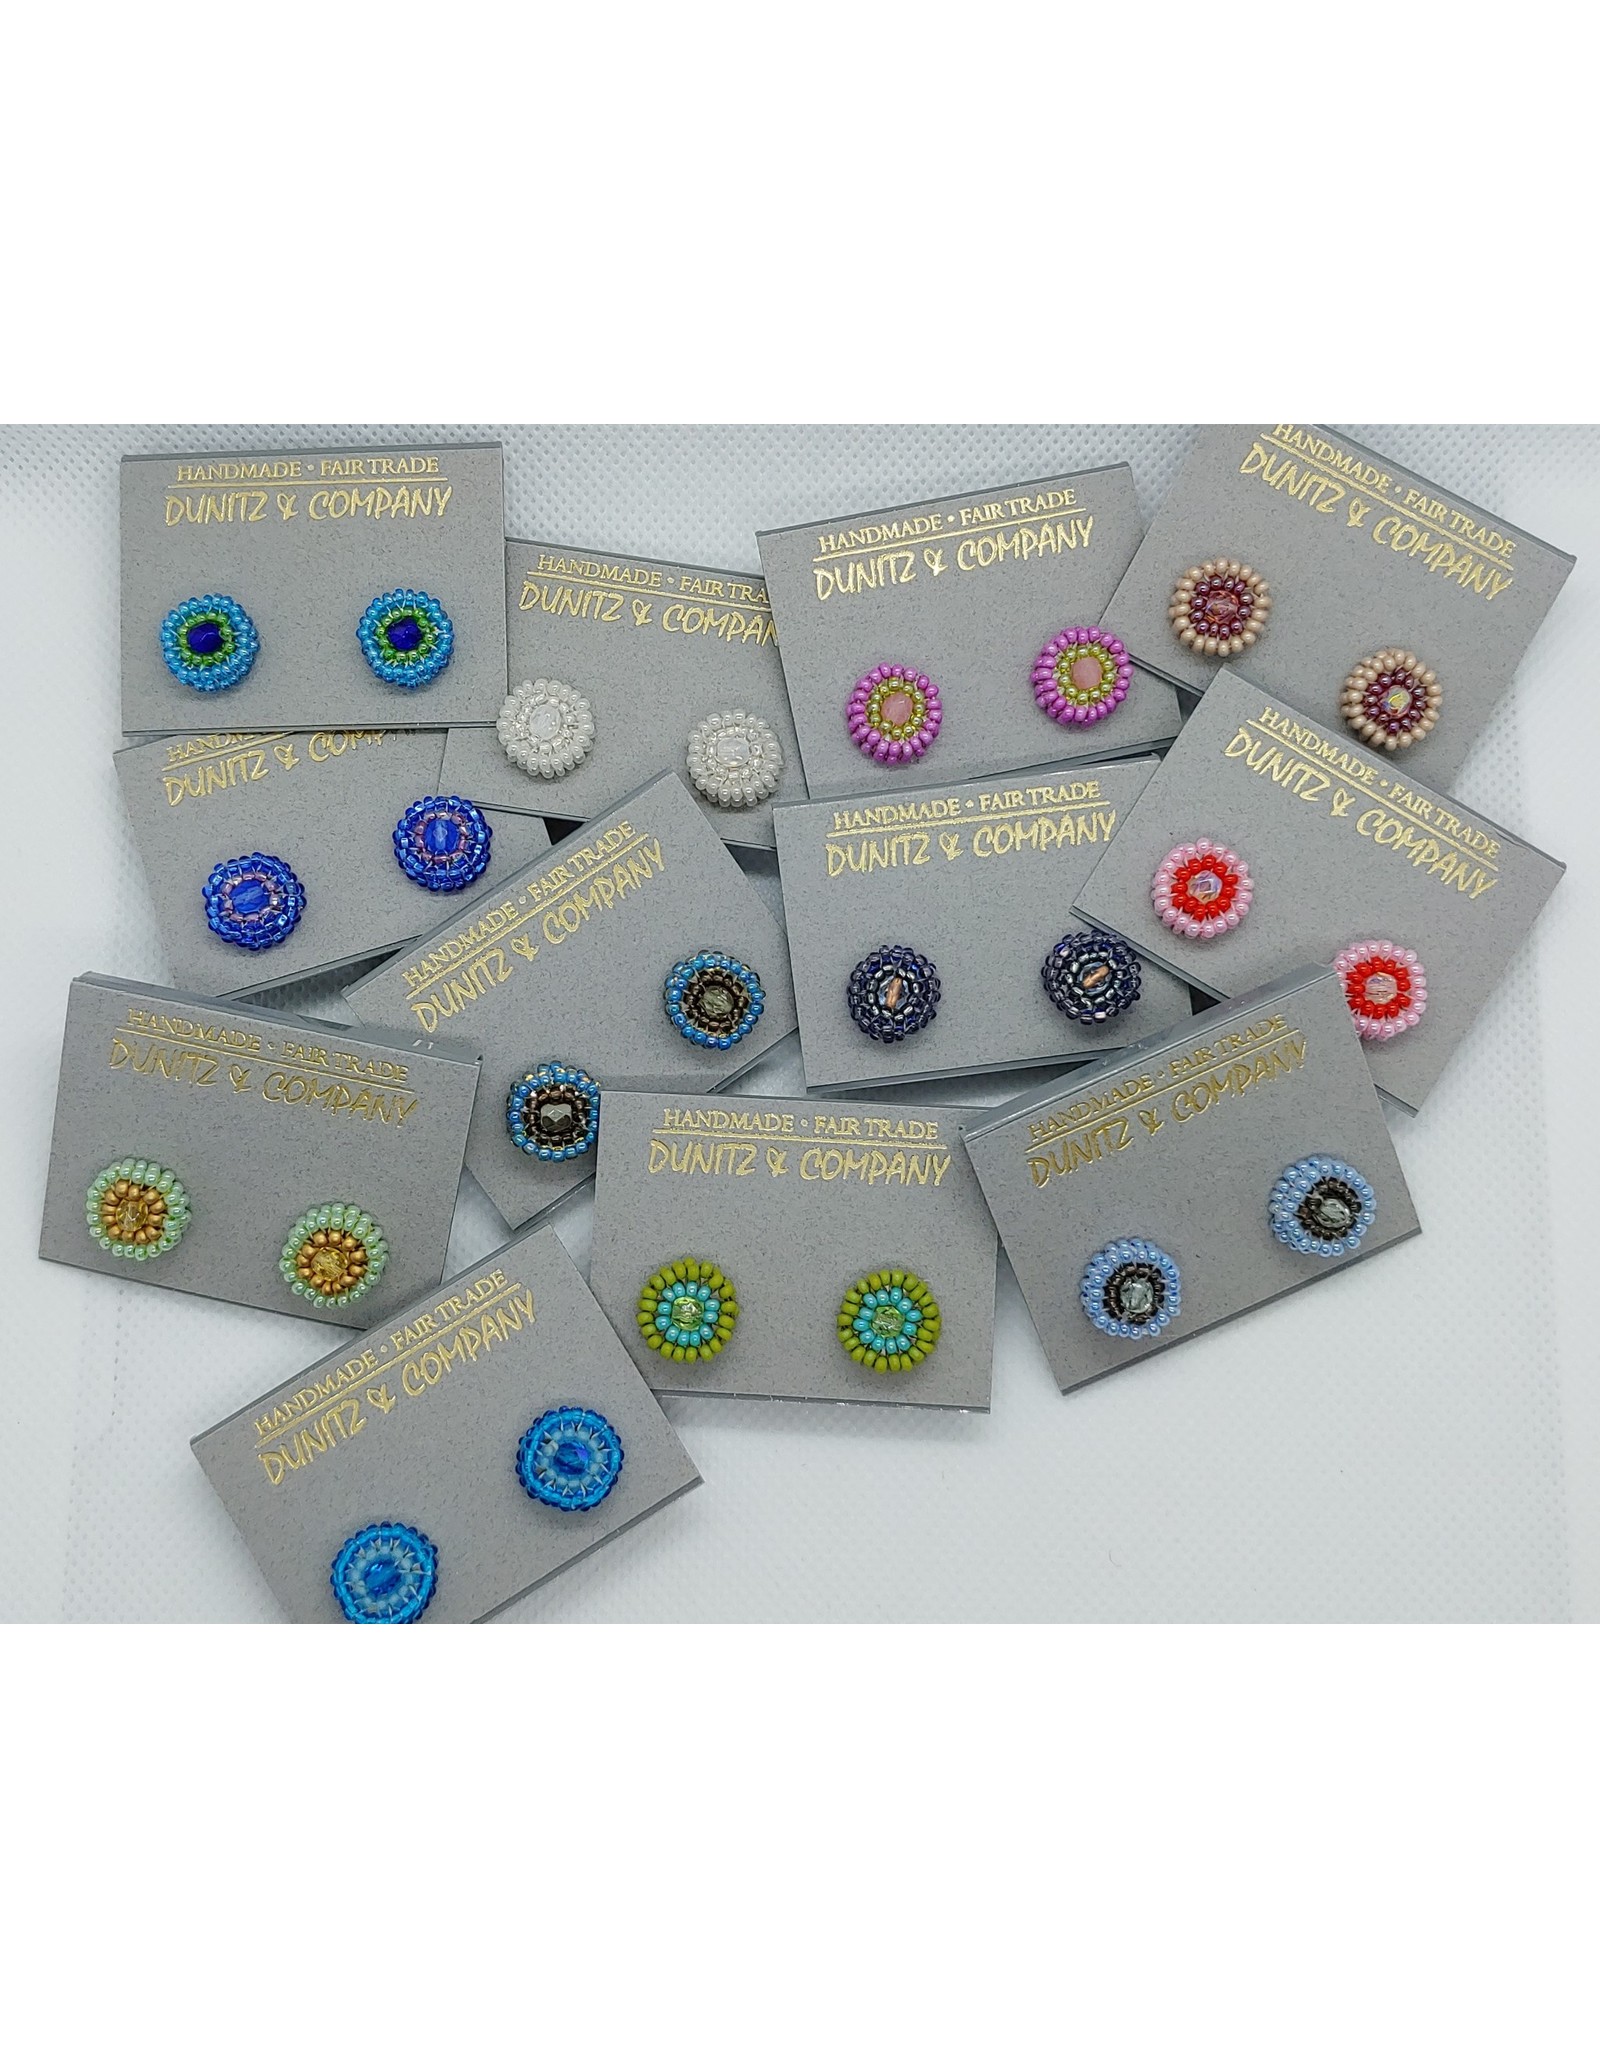 Trade roots Earring Dot Studs,  Colors Vary, Guatemala